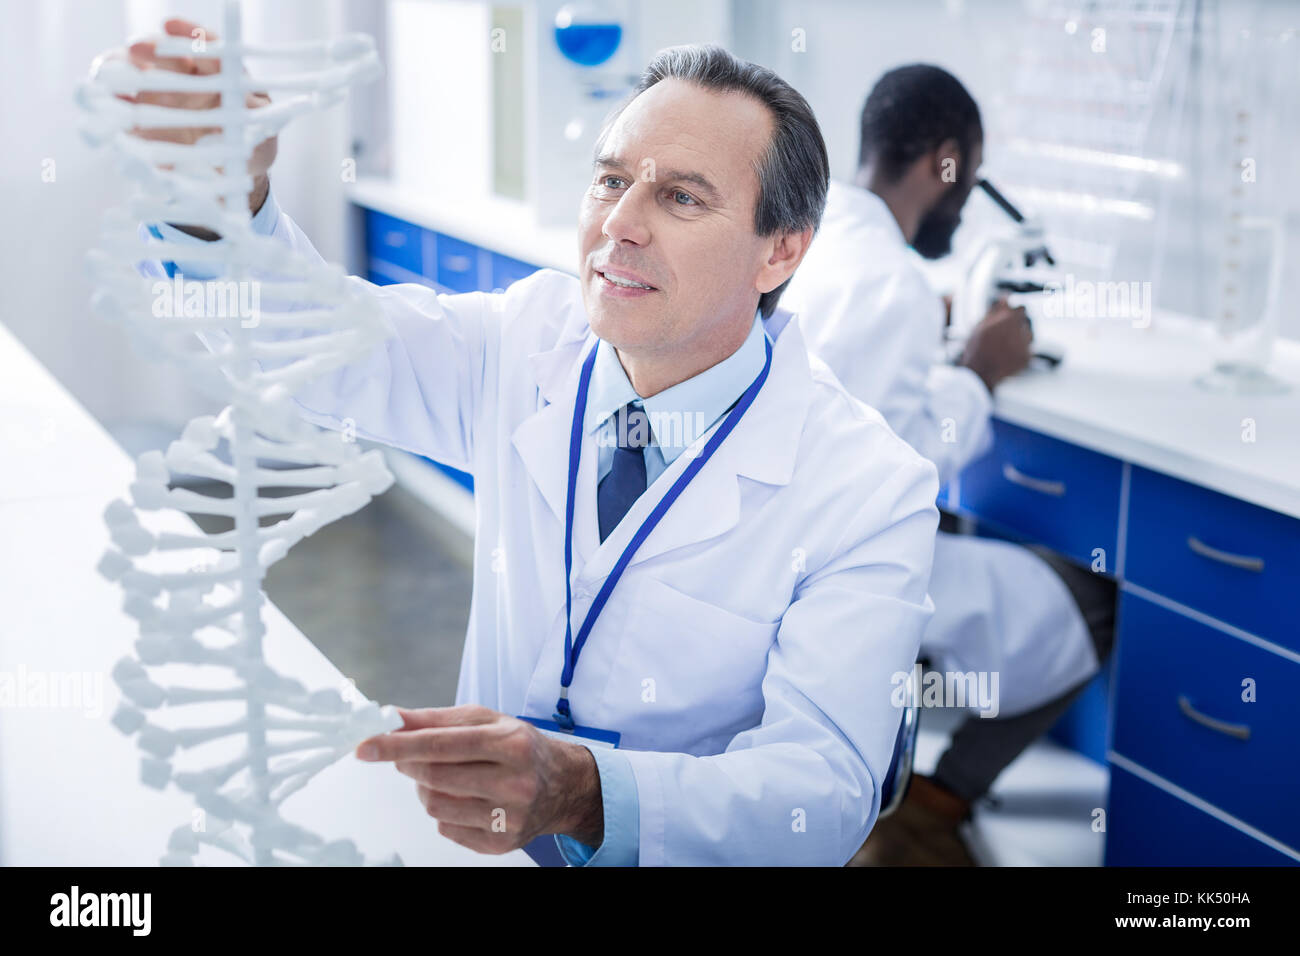 Nice serious scientist touching a DNA model Stock Photo